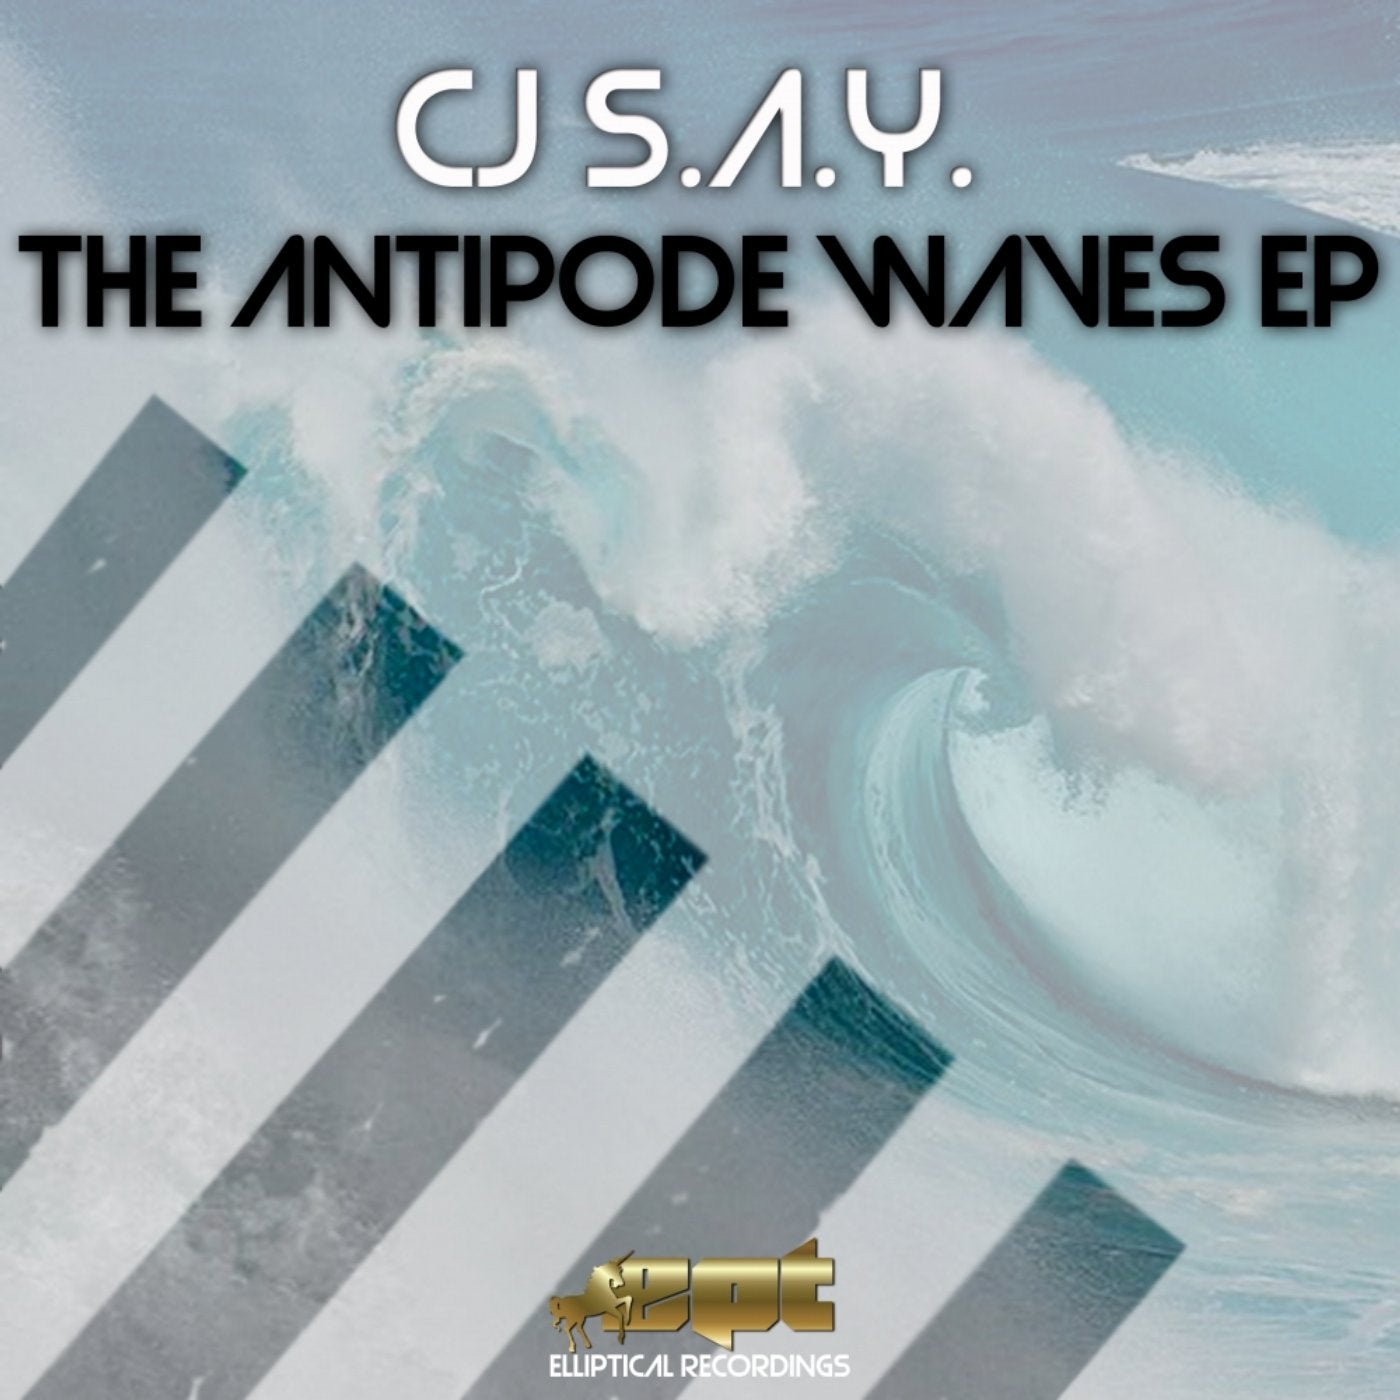 The Antipode Waves EP